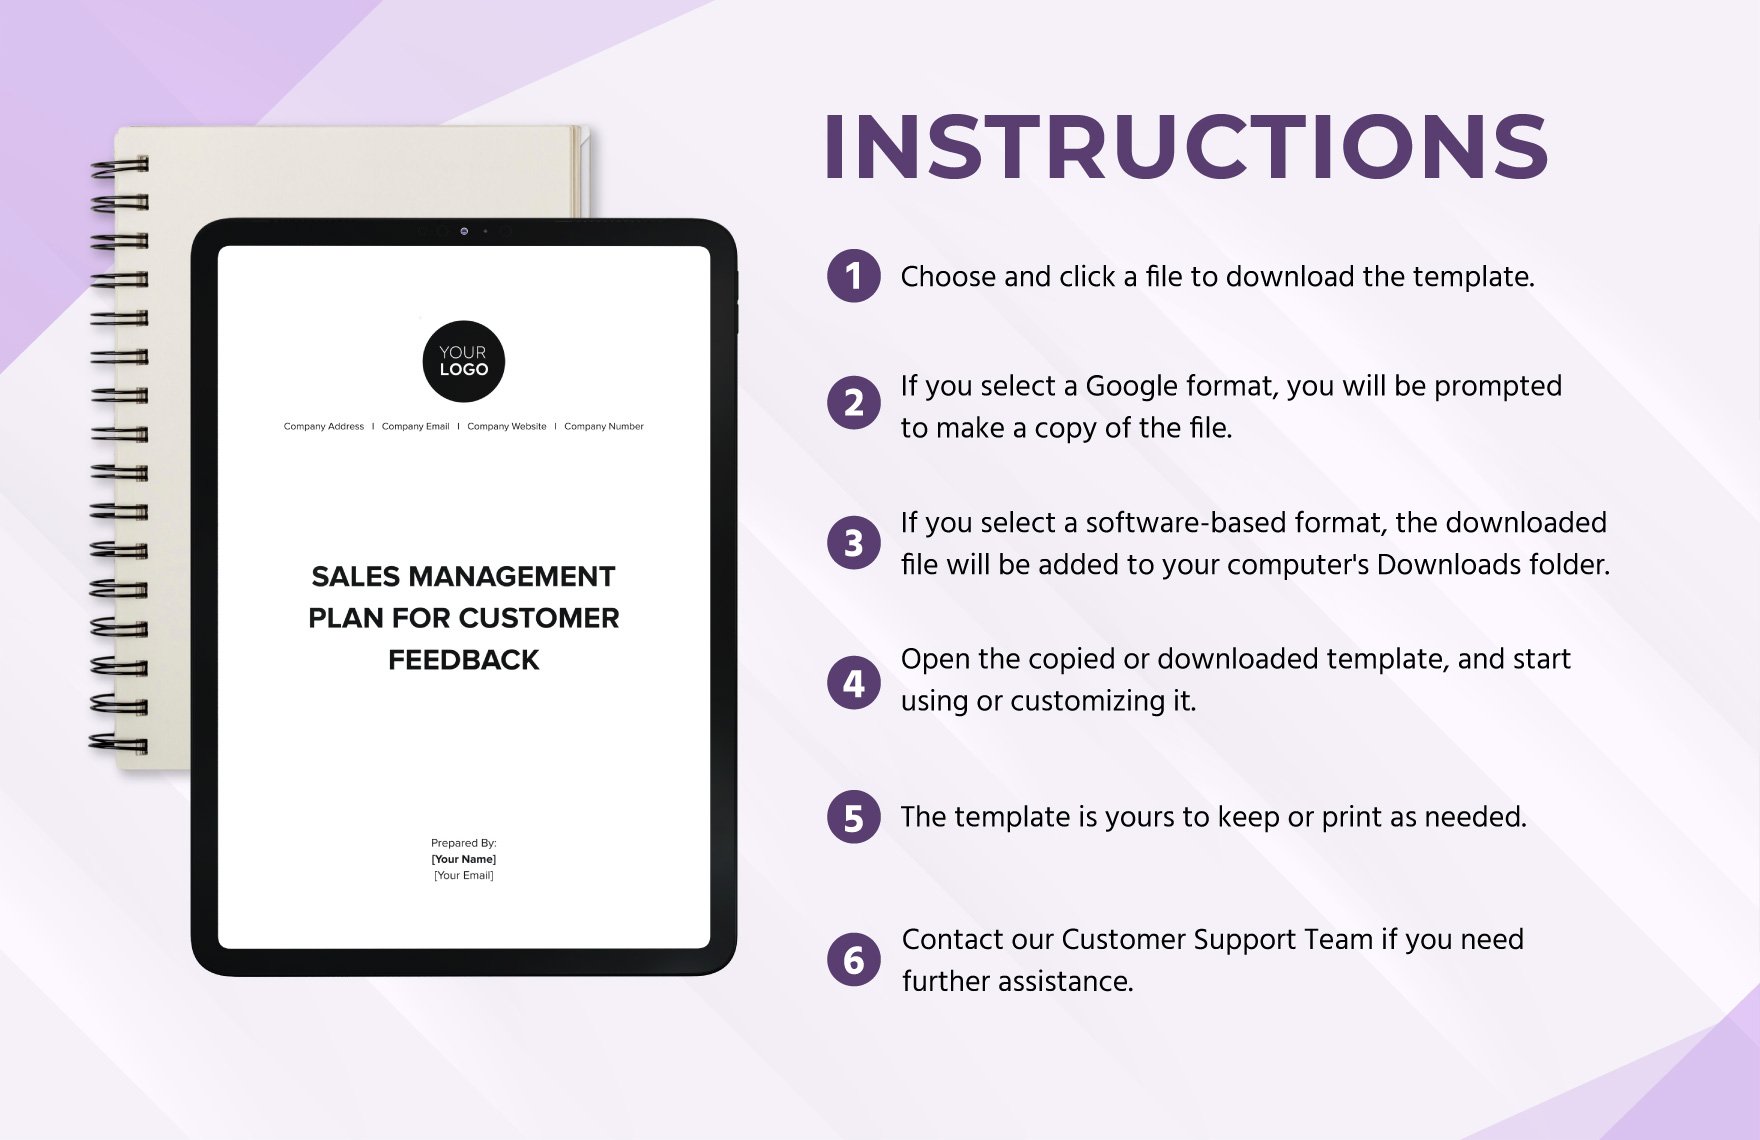 Sales Management Plan for Customer Feedback Template